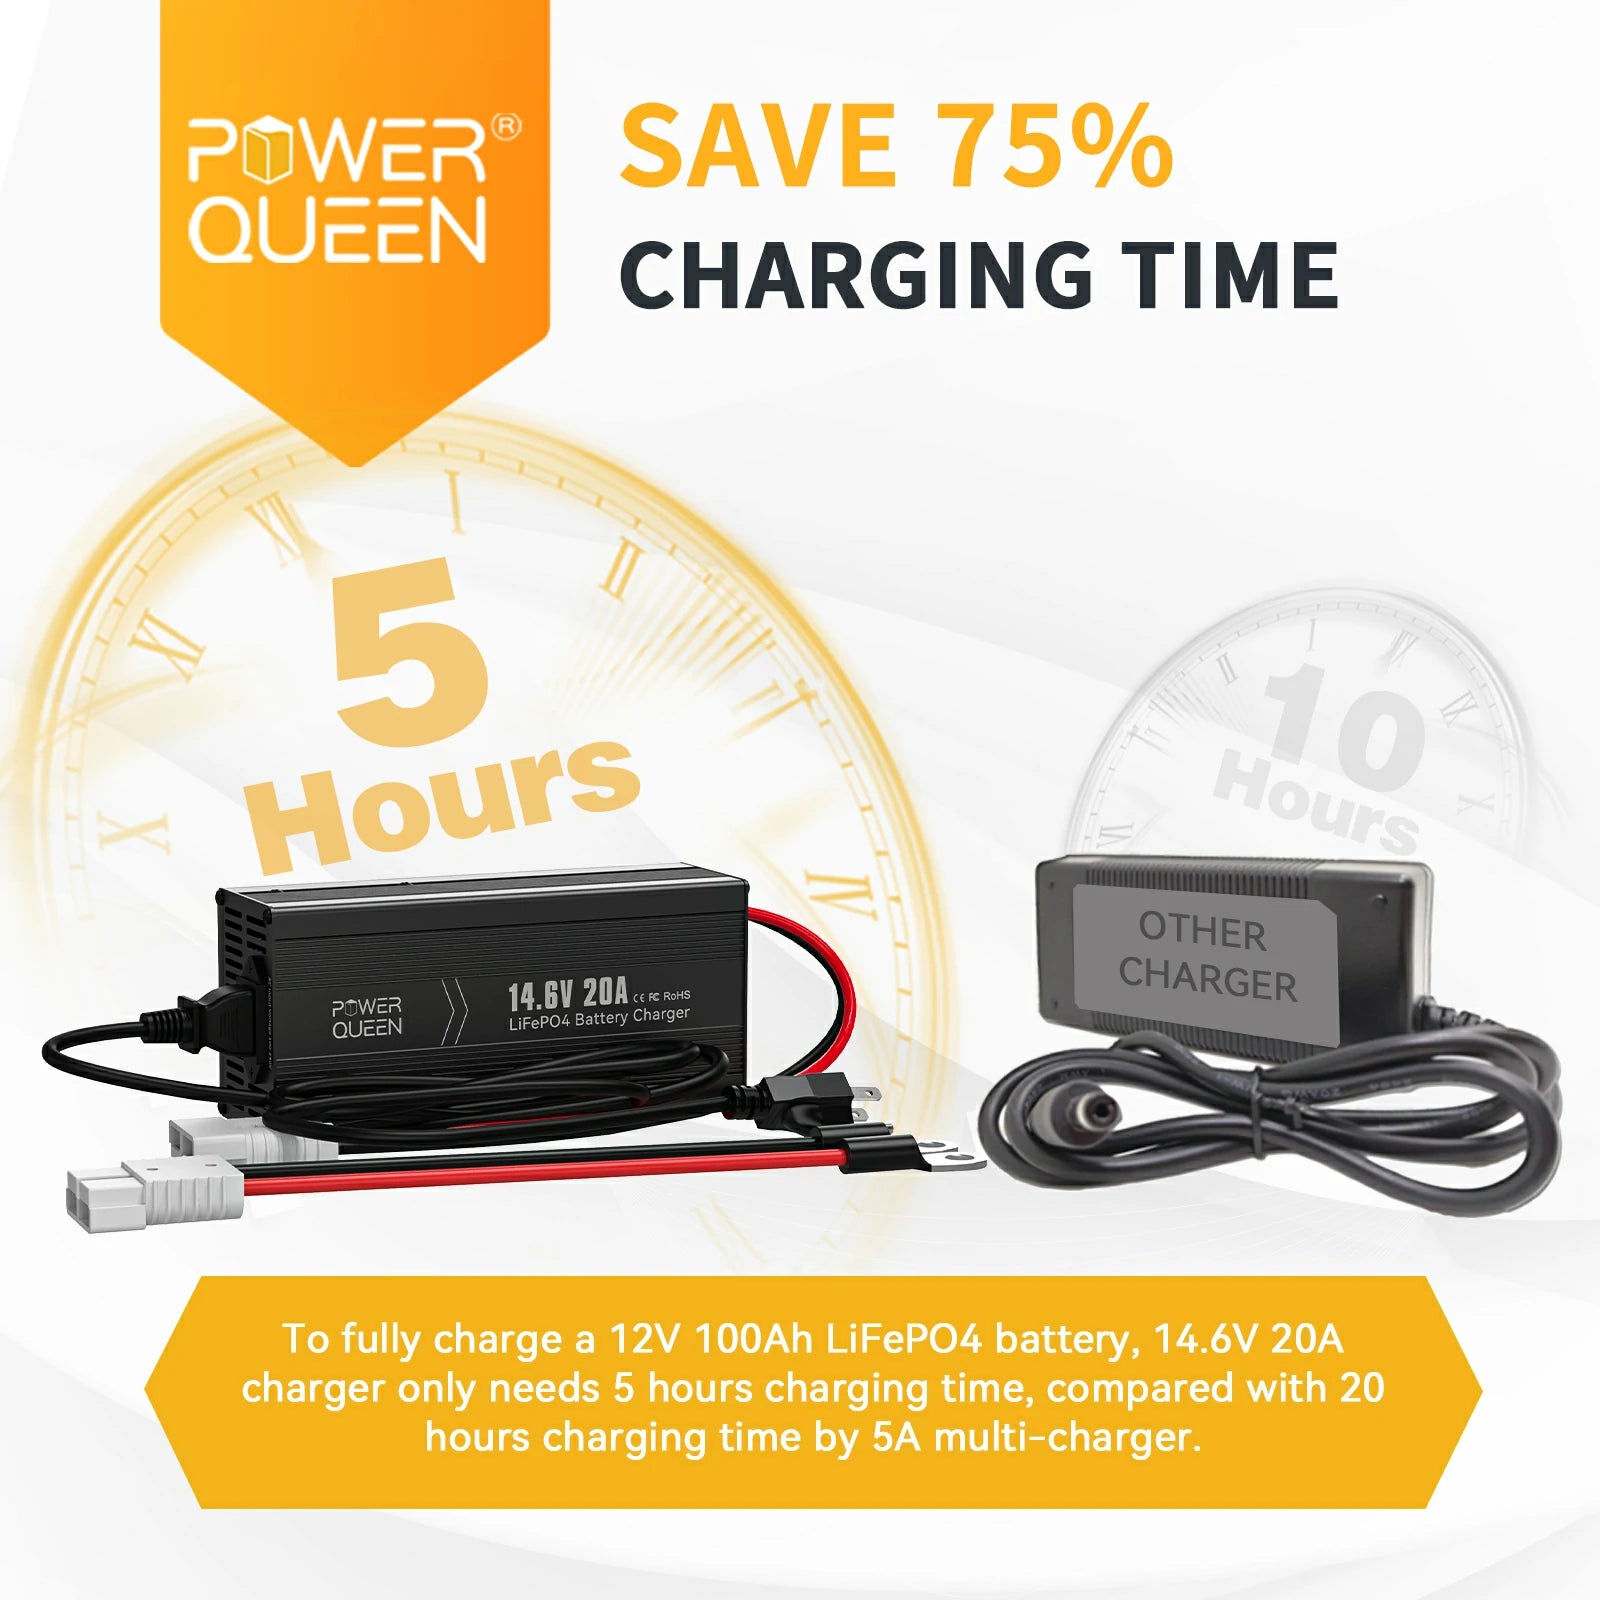 Power-Queen-14.6V-20A-lithium-ion-charger